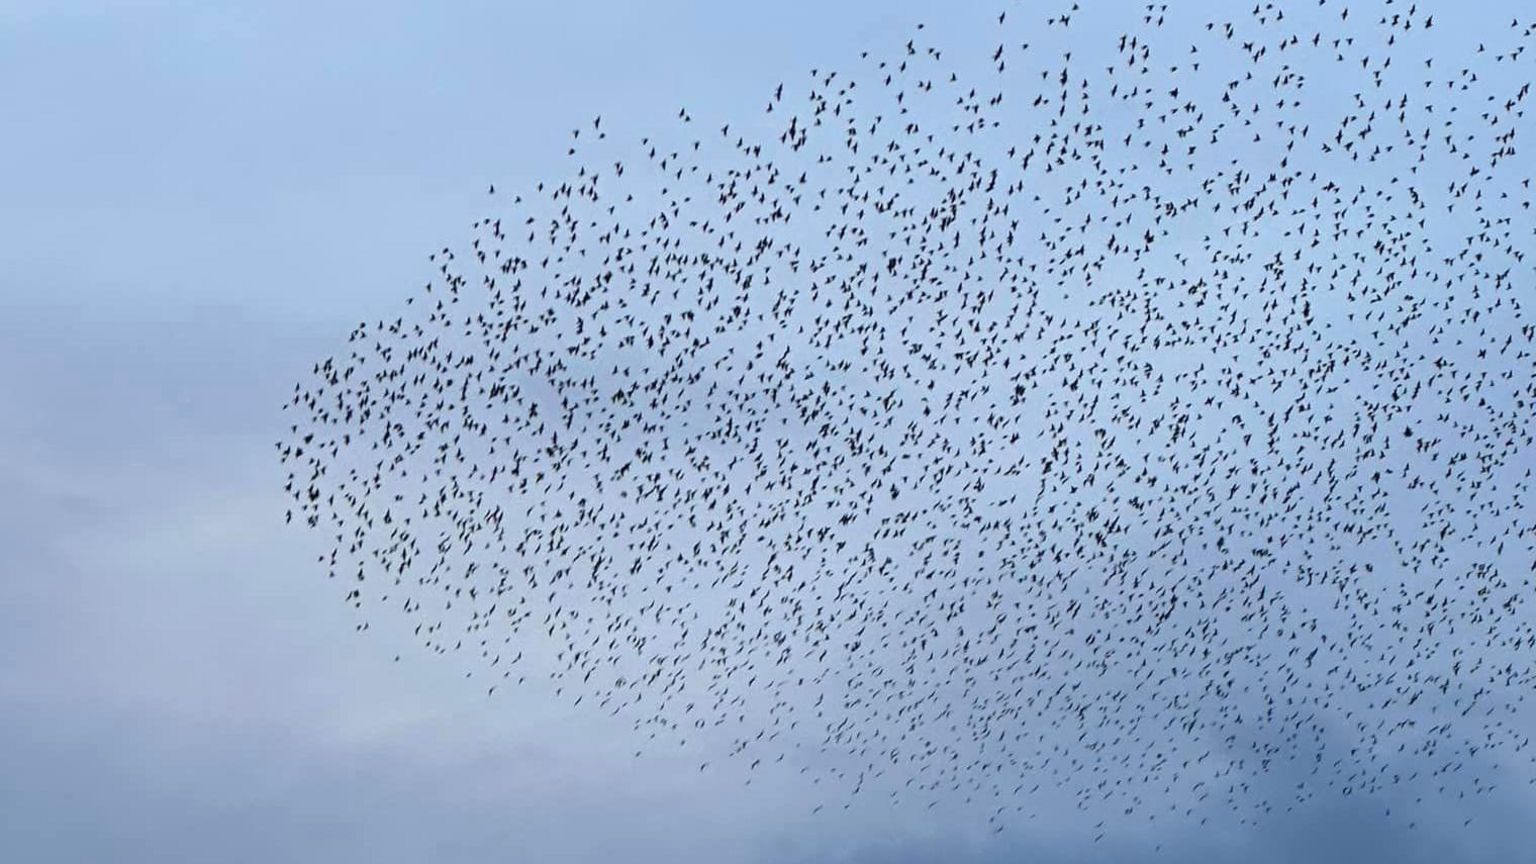 Picture of the murmuration